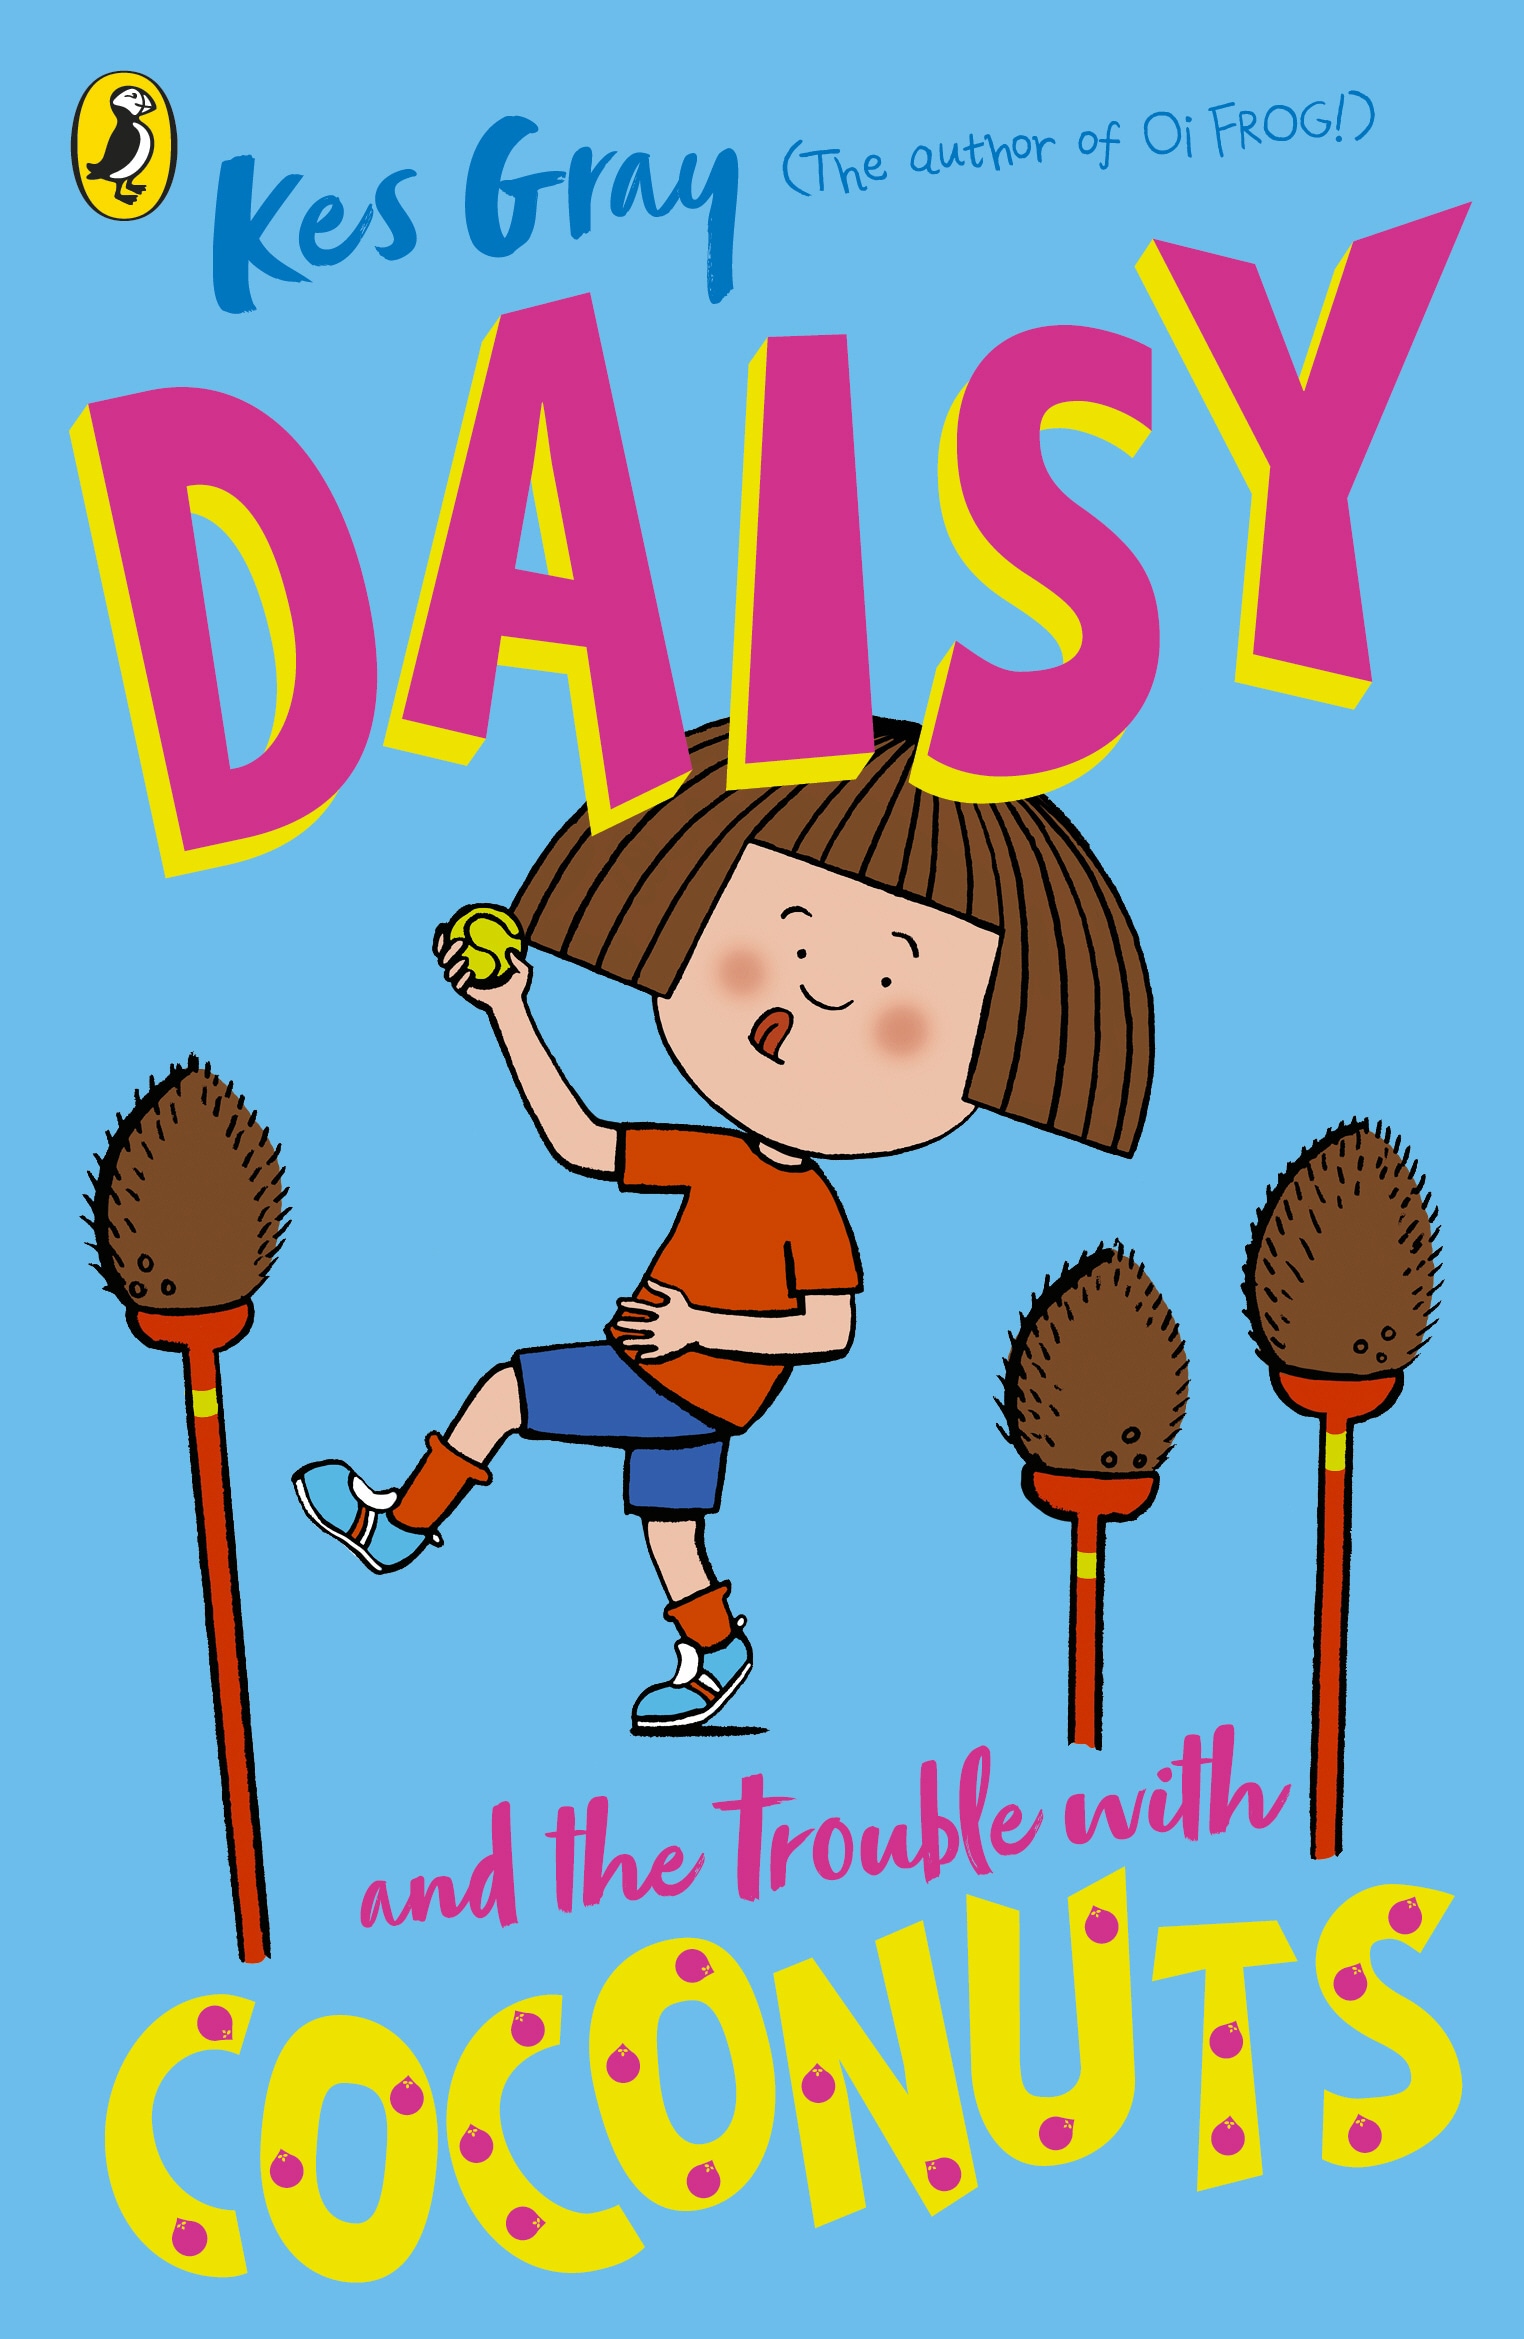 Book “Daisy and the Trouble with Coconuts” by Kes Gray — August 6, 2020